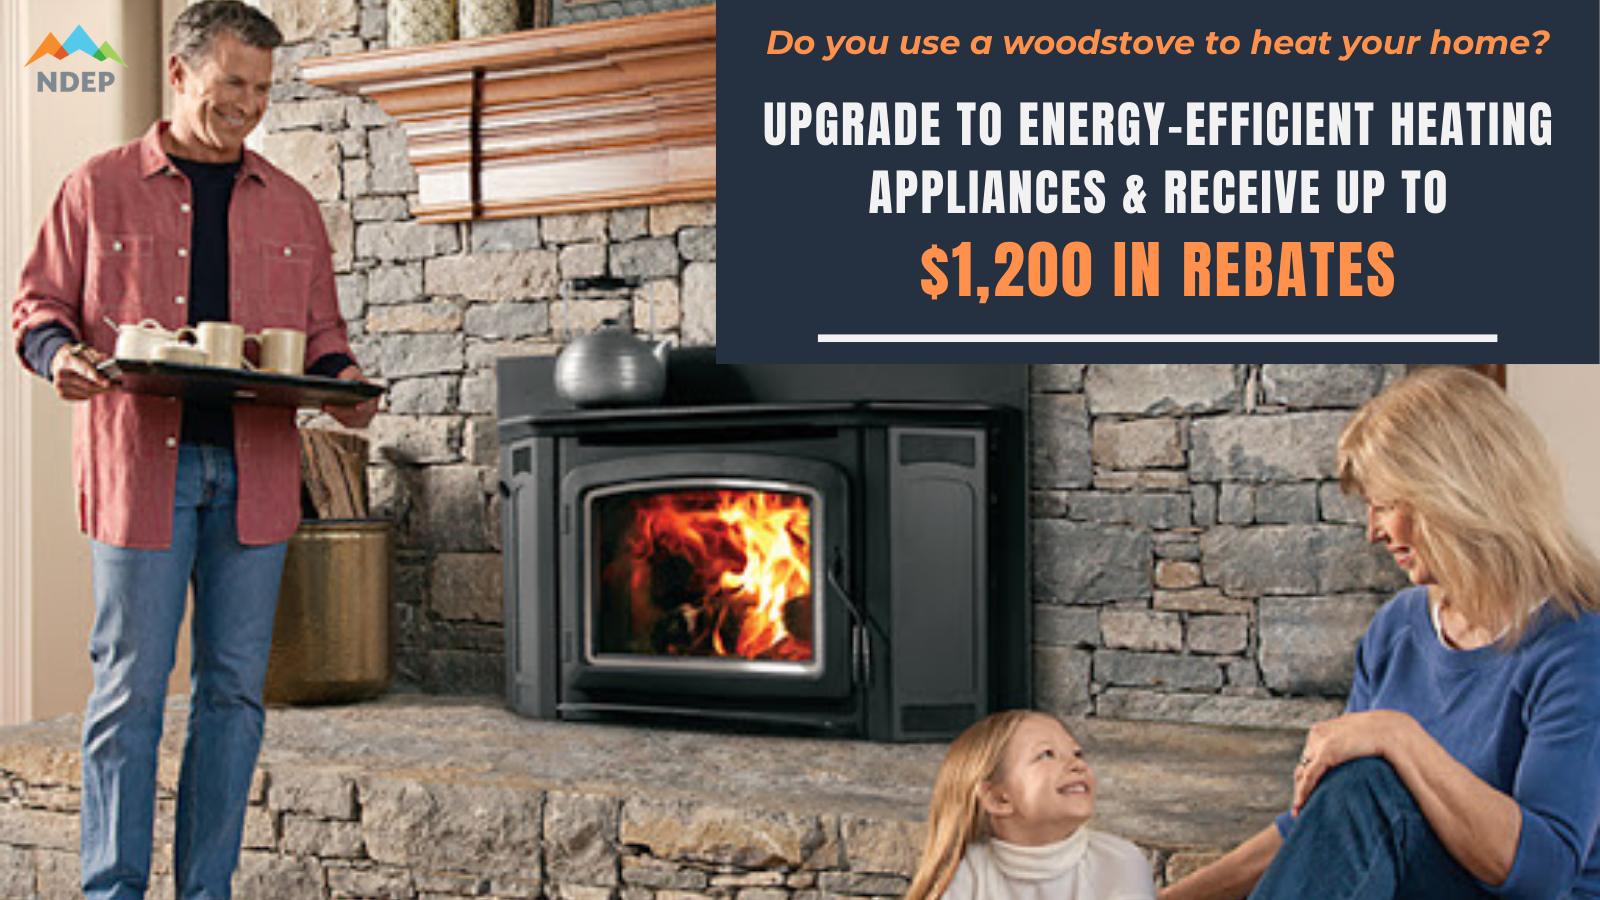 rebates-for-energy-efficient-appliances-available-in-massachusetts